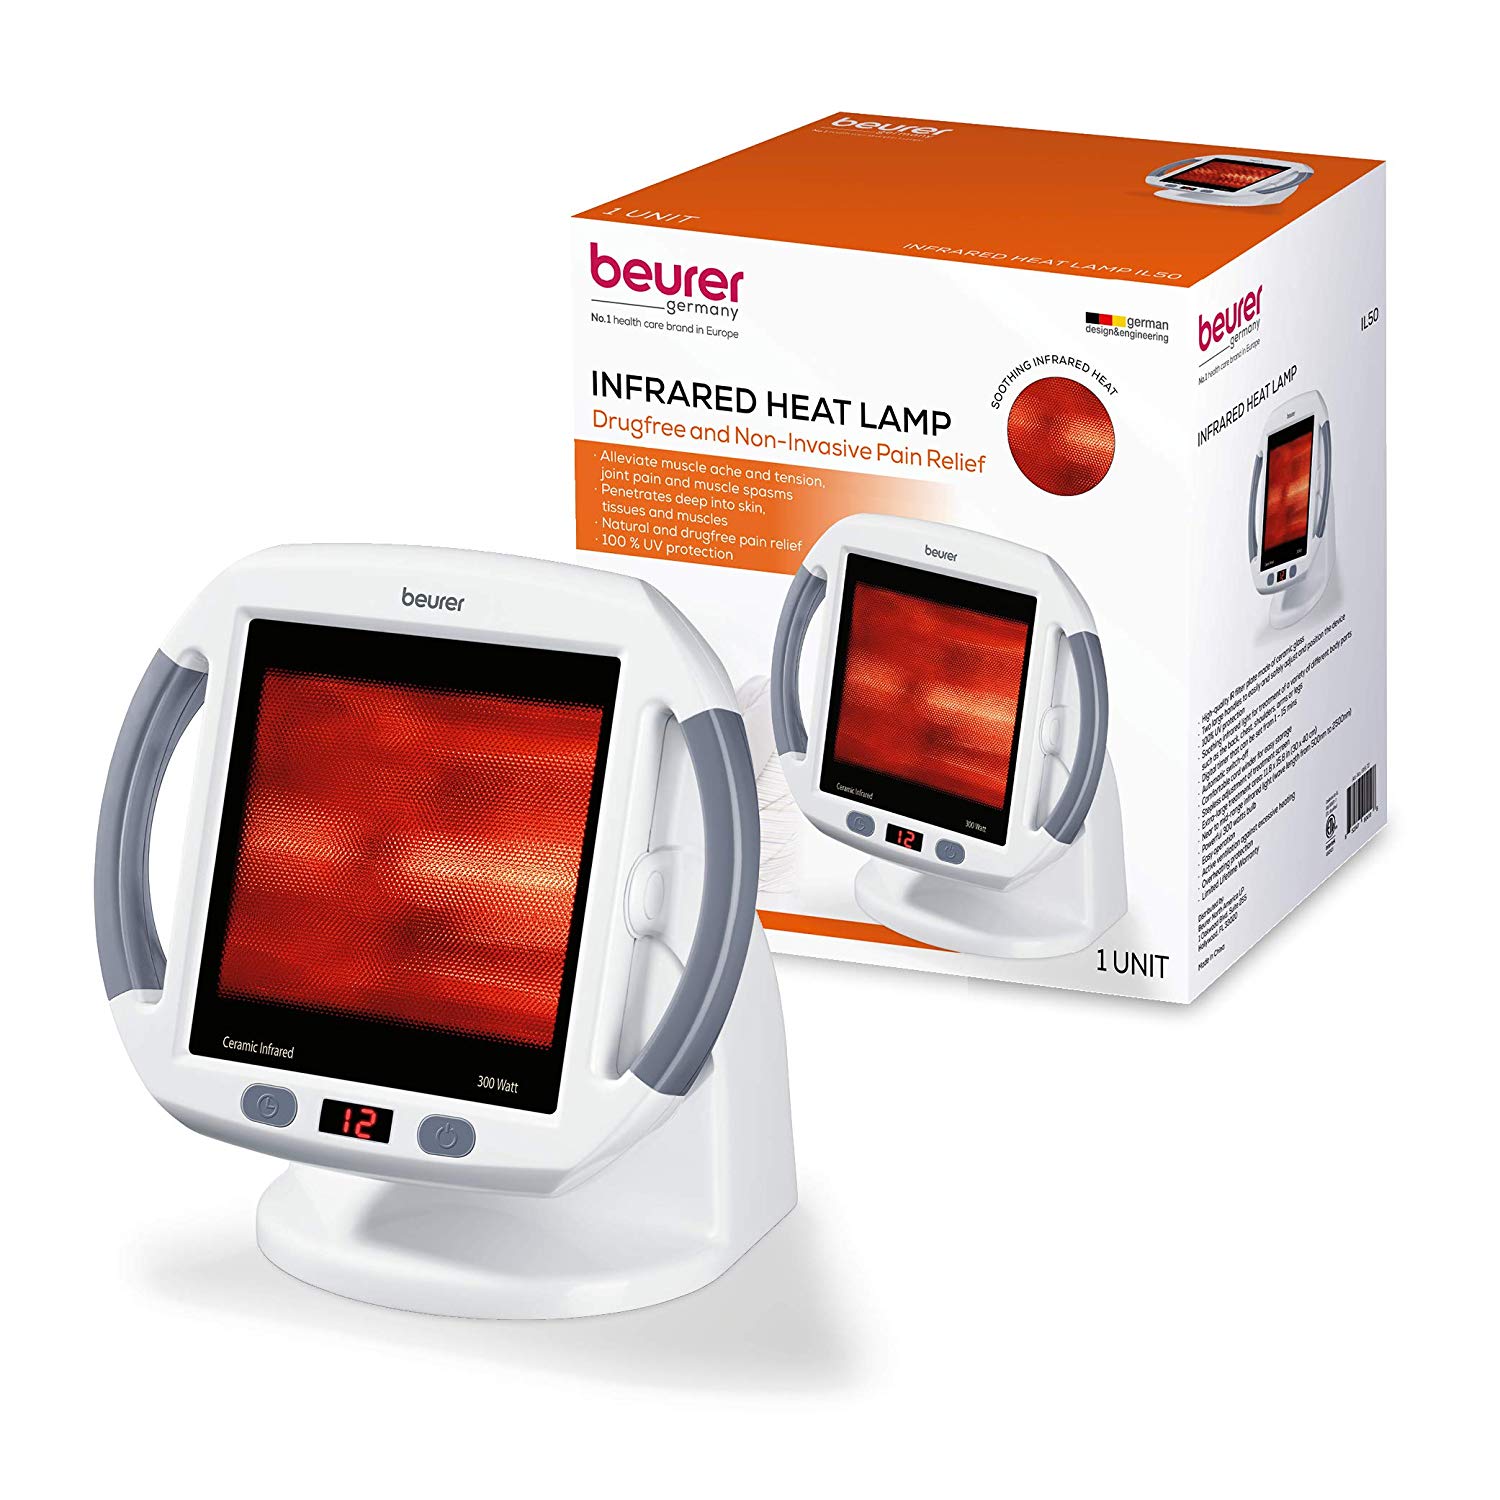 Beurer Infrared Heat Lamp Complete Reviews